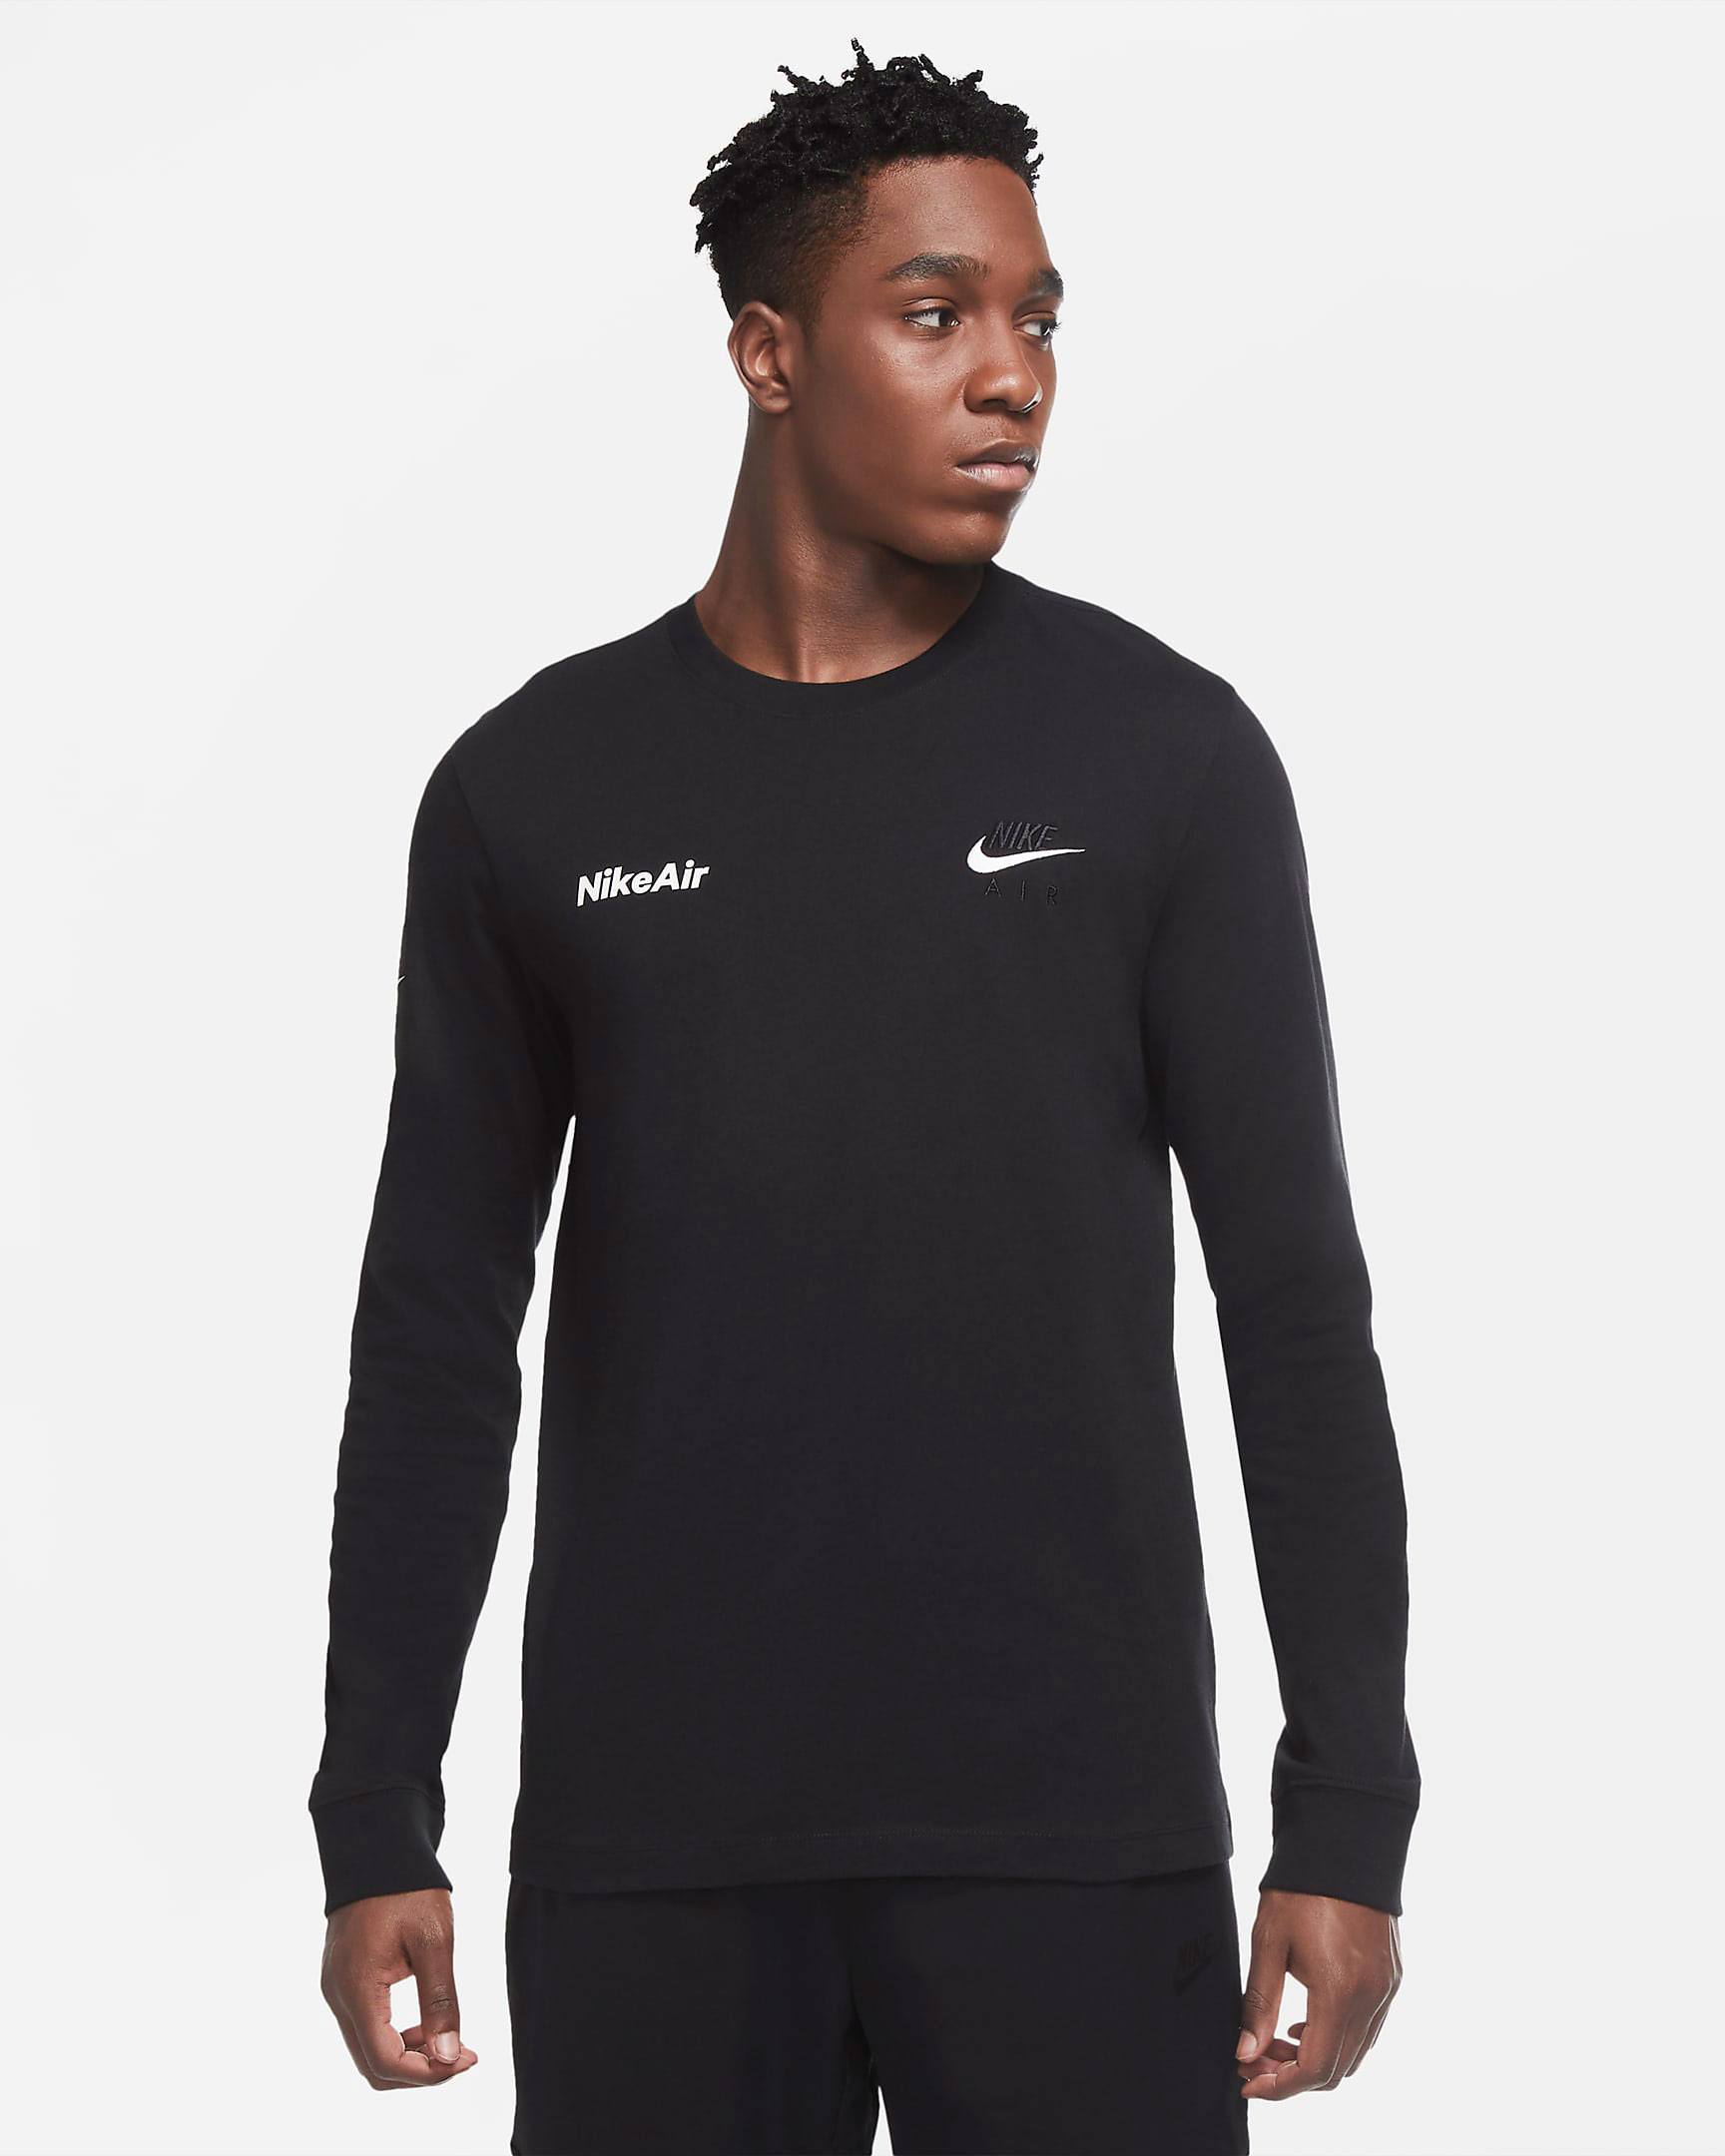 nike-foamposite-one-anthracite-blackout-long-sleeve-shirt-match-1